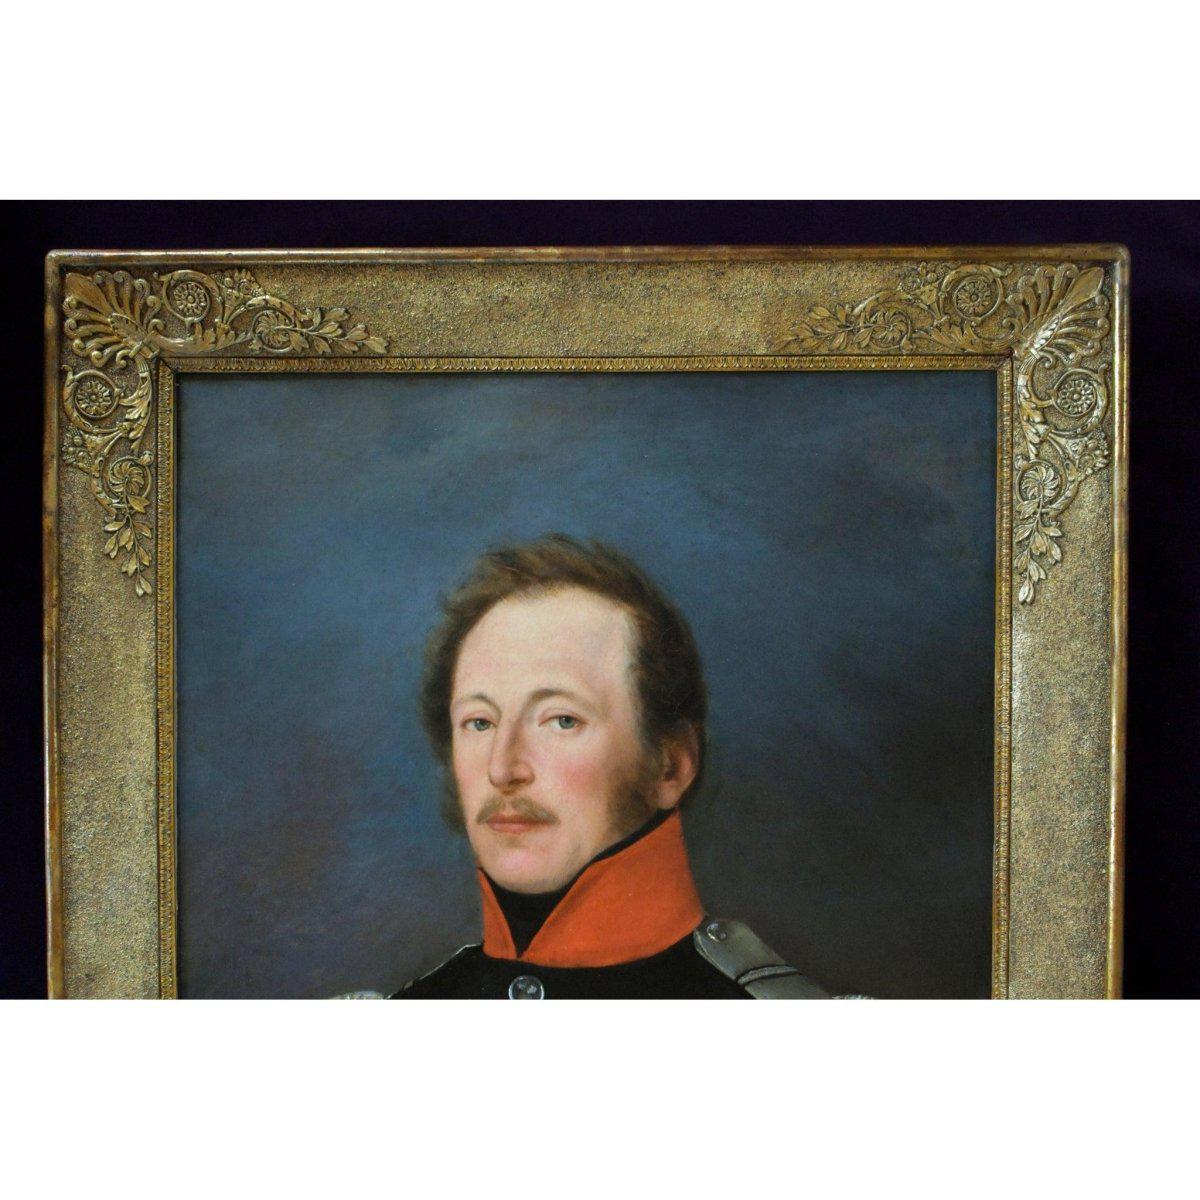 Antique portrait oil painting of a military officer 19th century French school for sale at Winckelmann Gallery